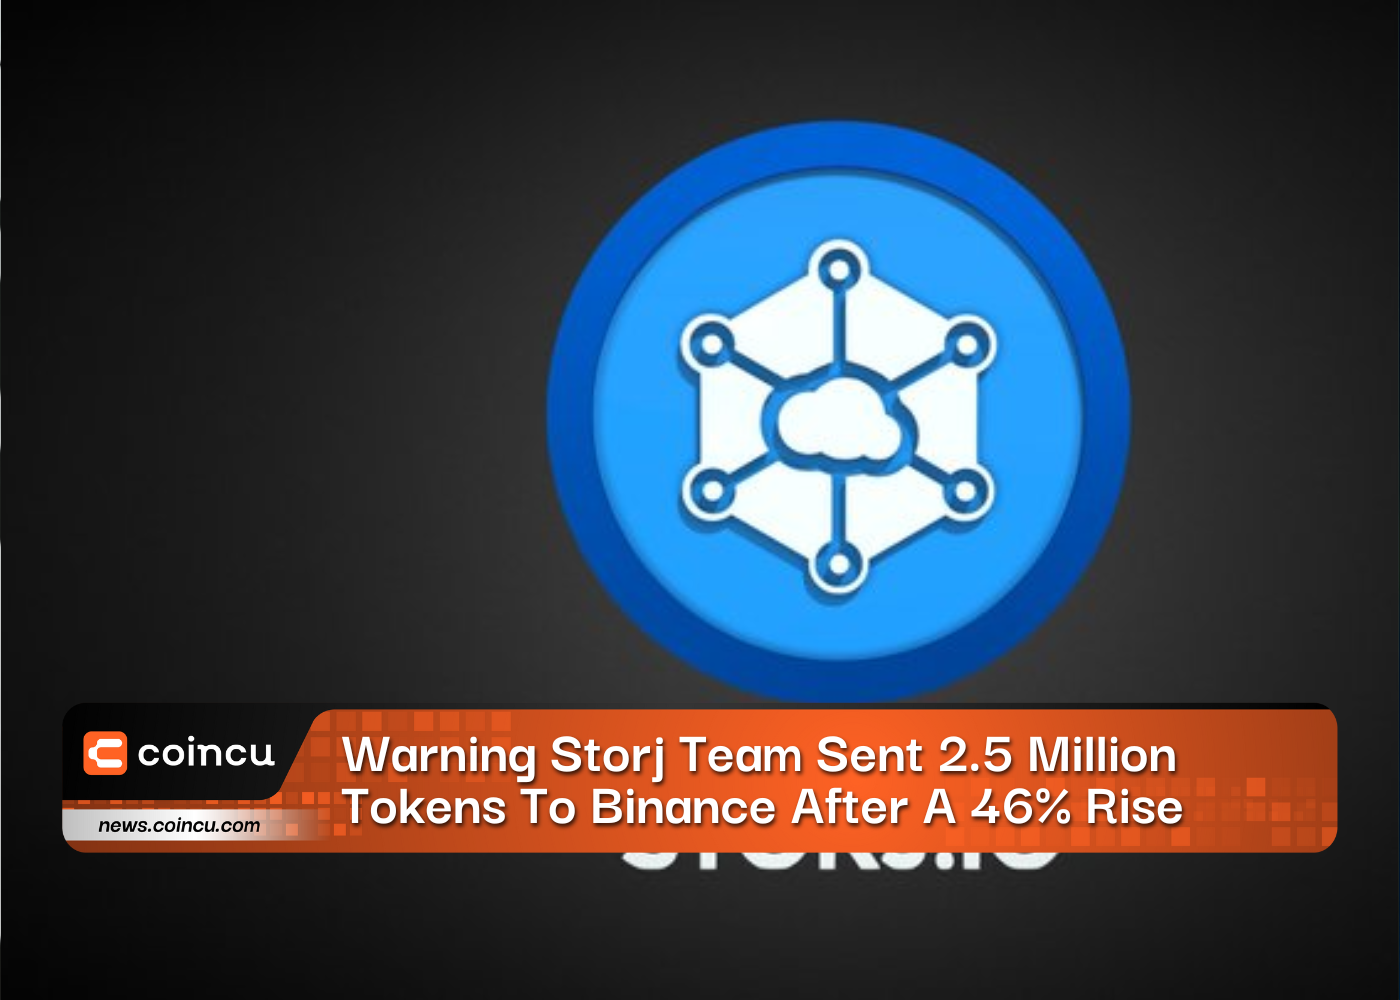 Warning Storj Team Sent 2.5 Million Tokens To Binance After A 46% Rise